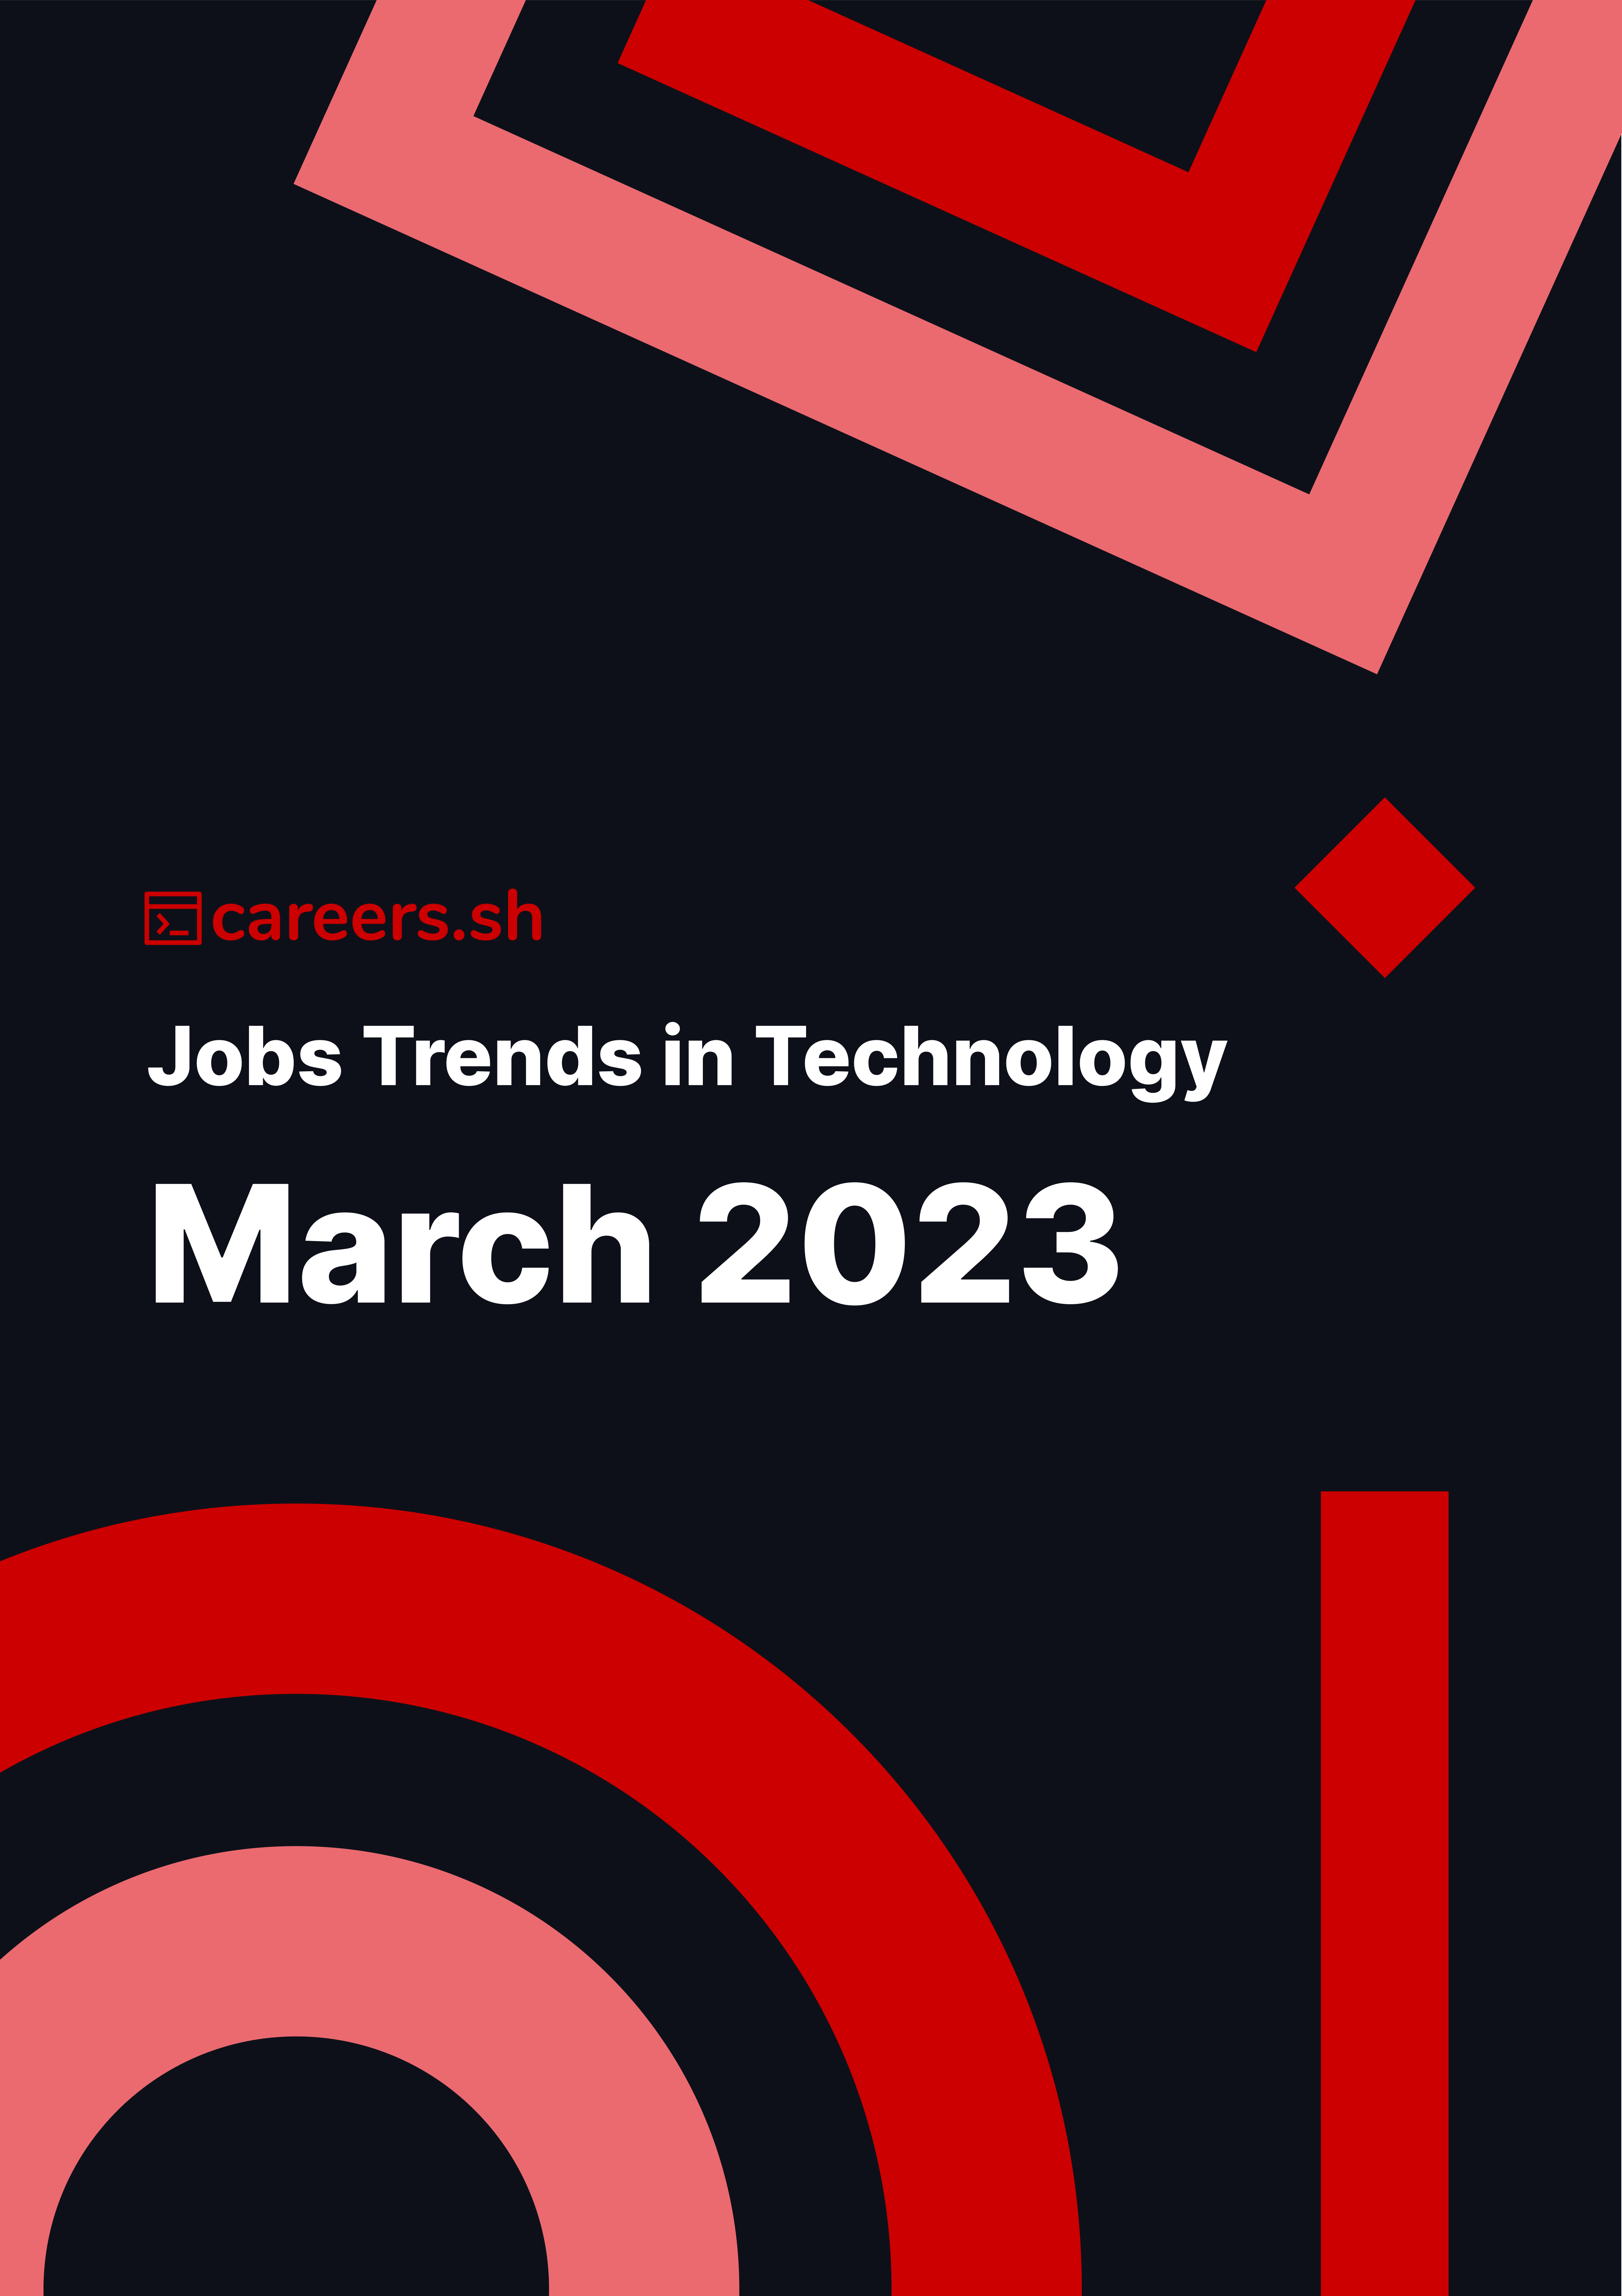 Careers.sh - March 2023